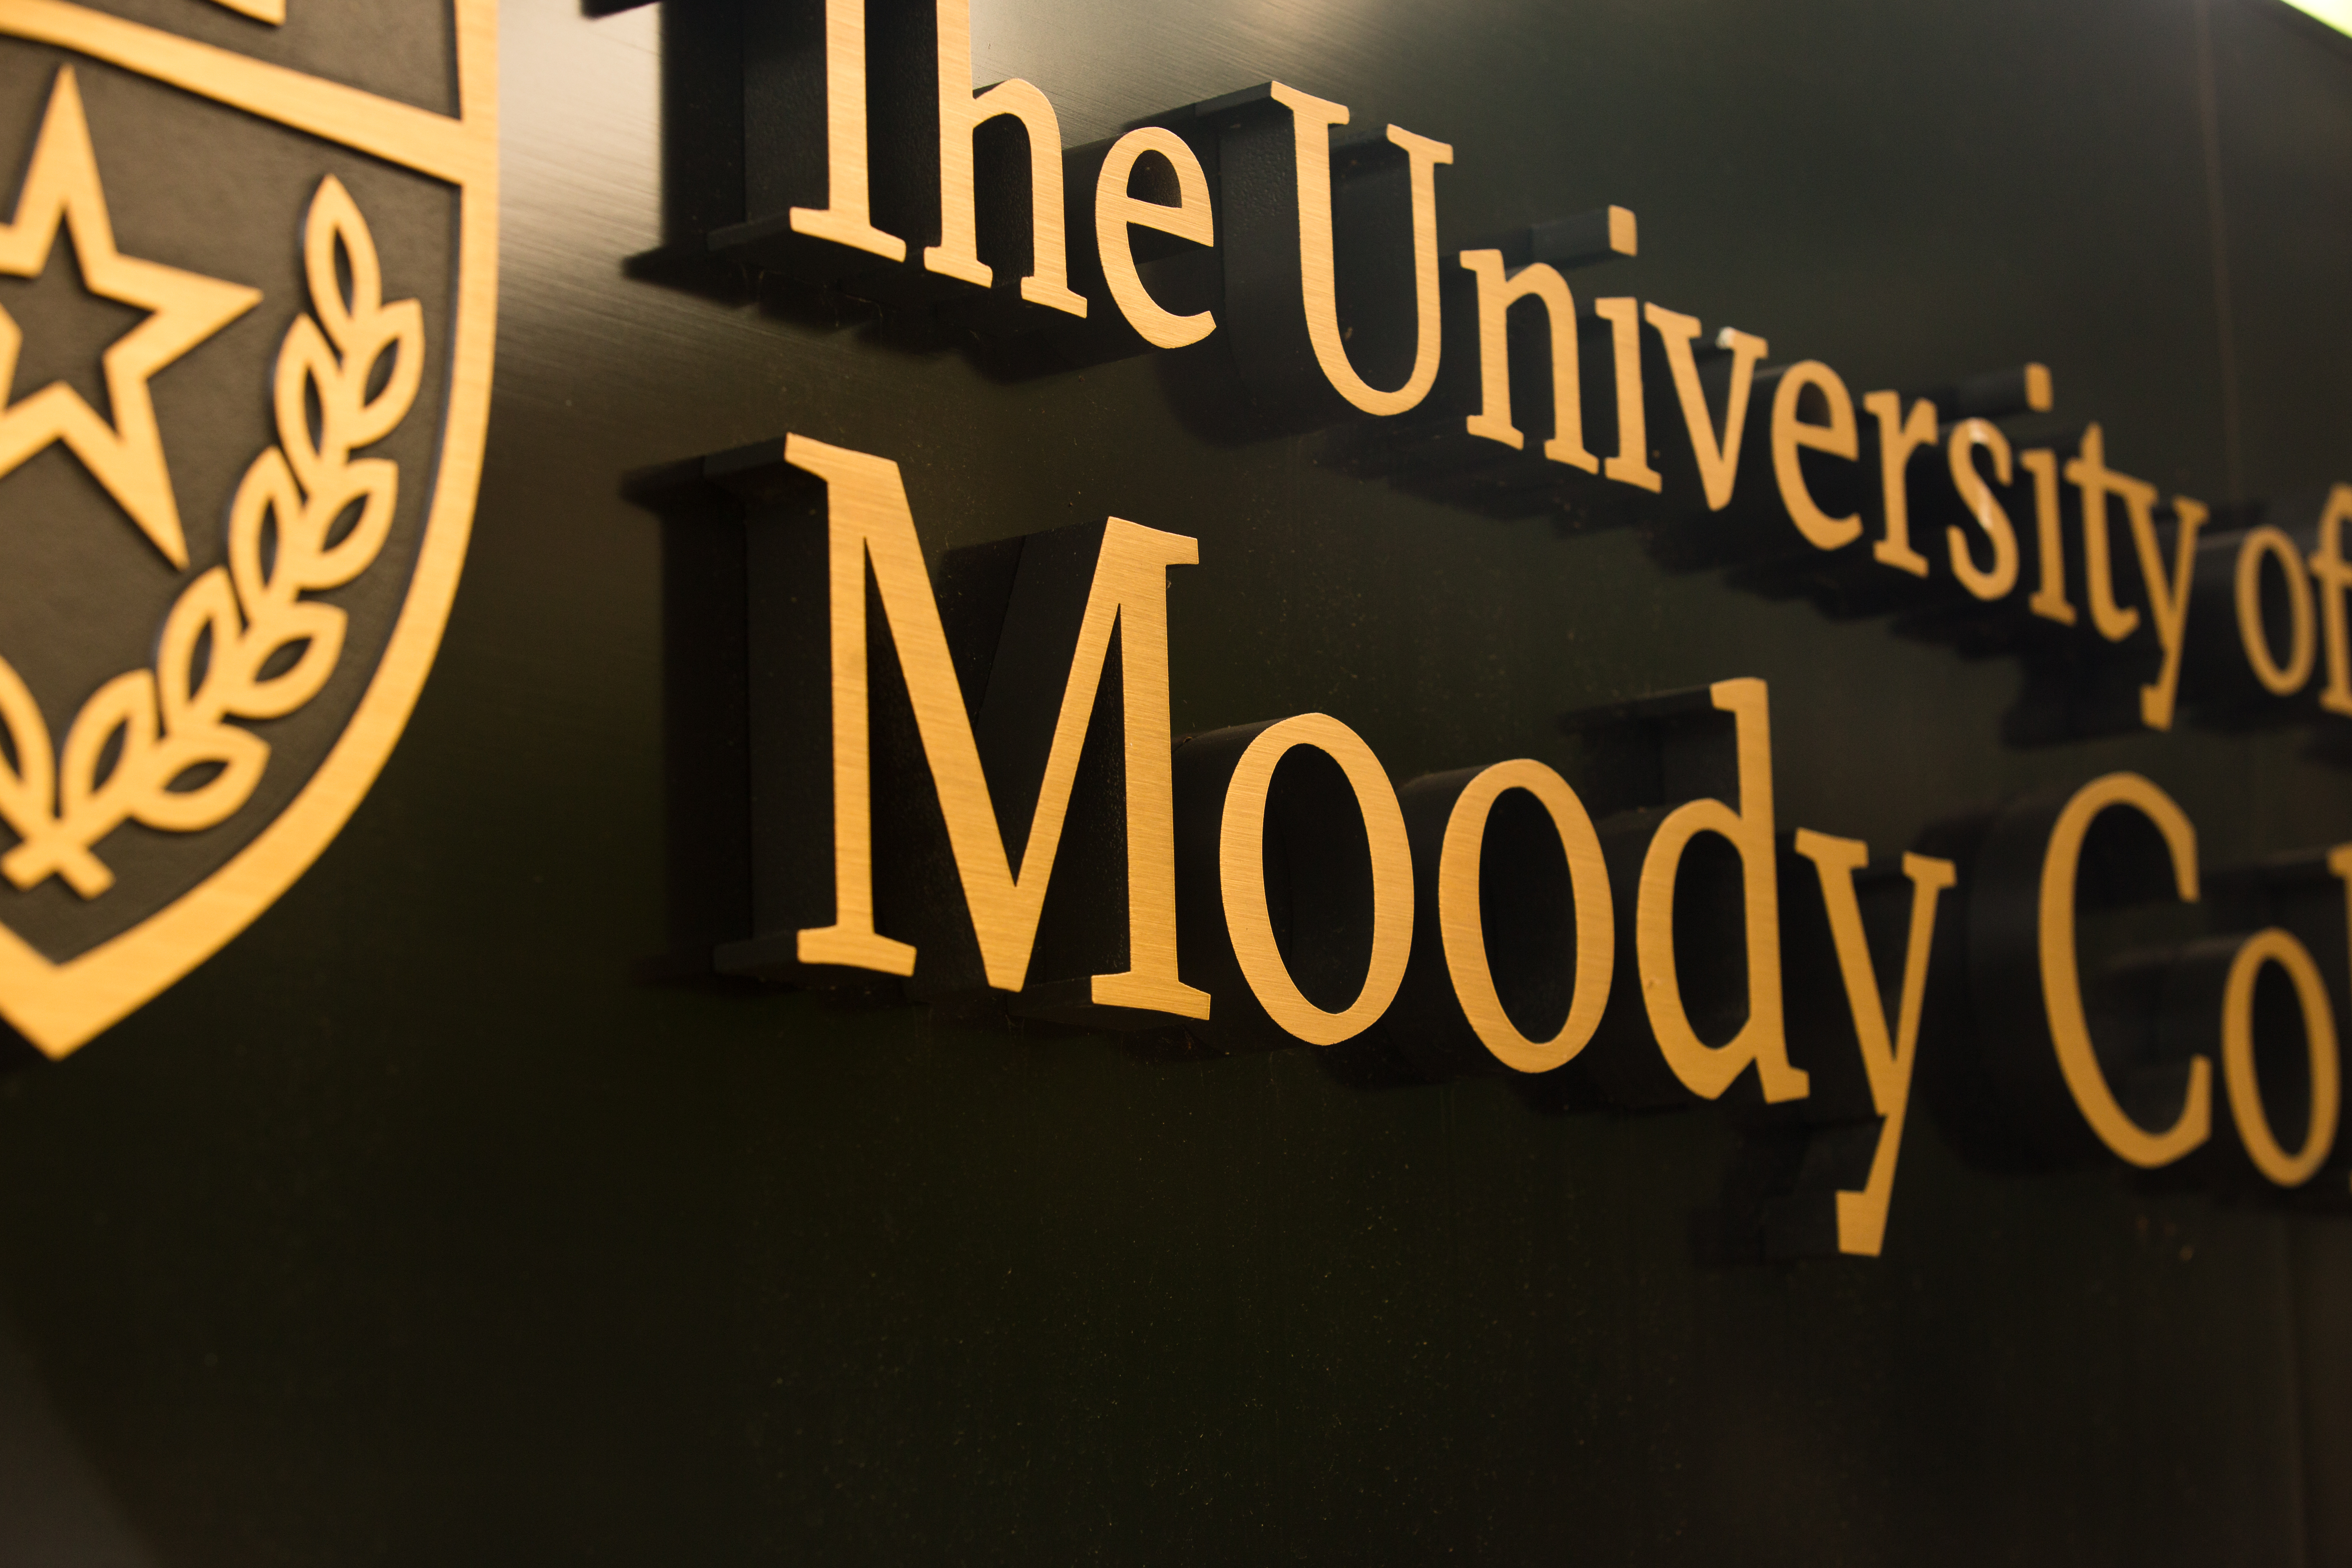 Moody College of Communication